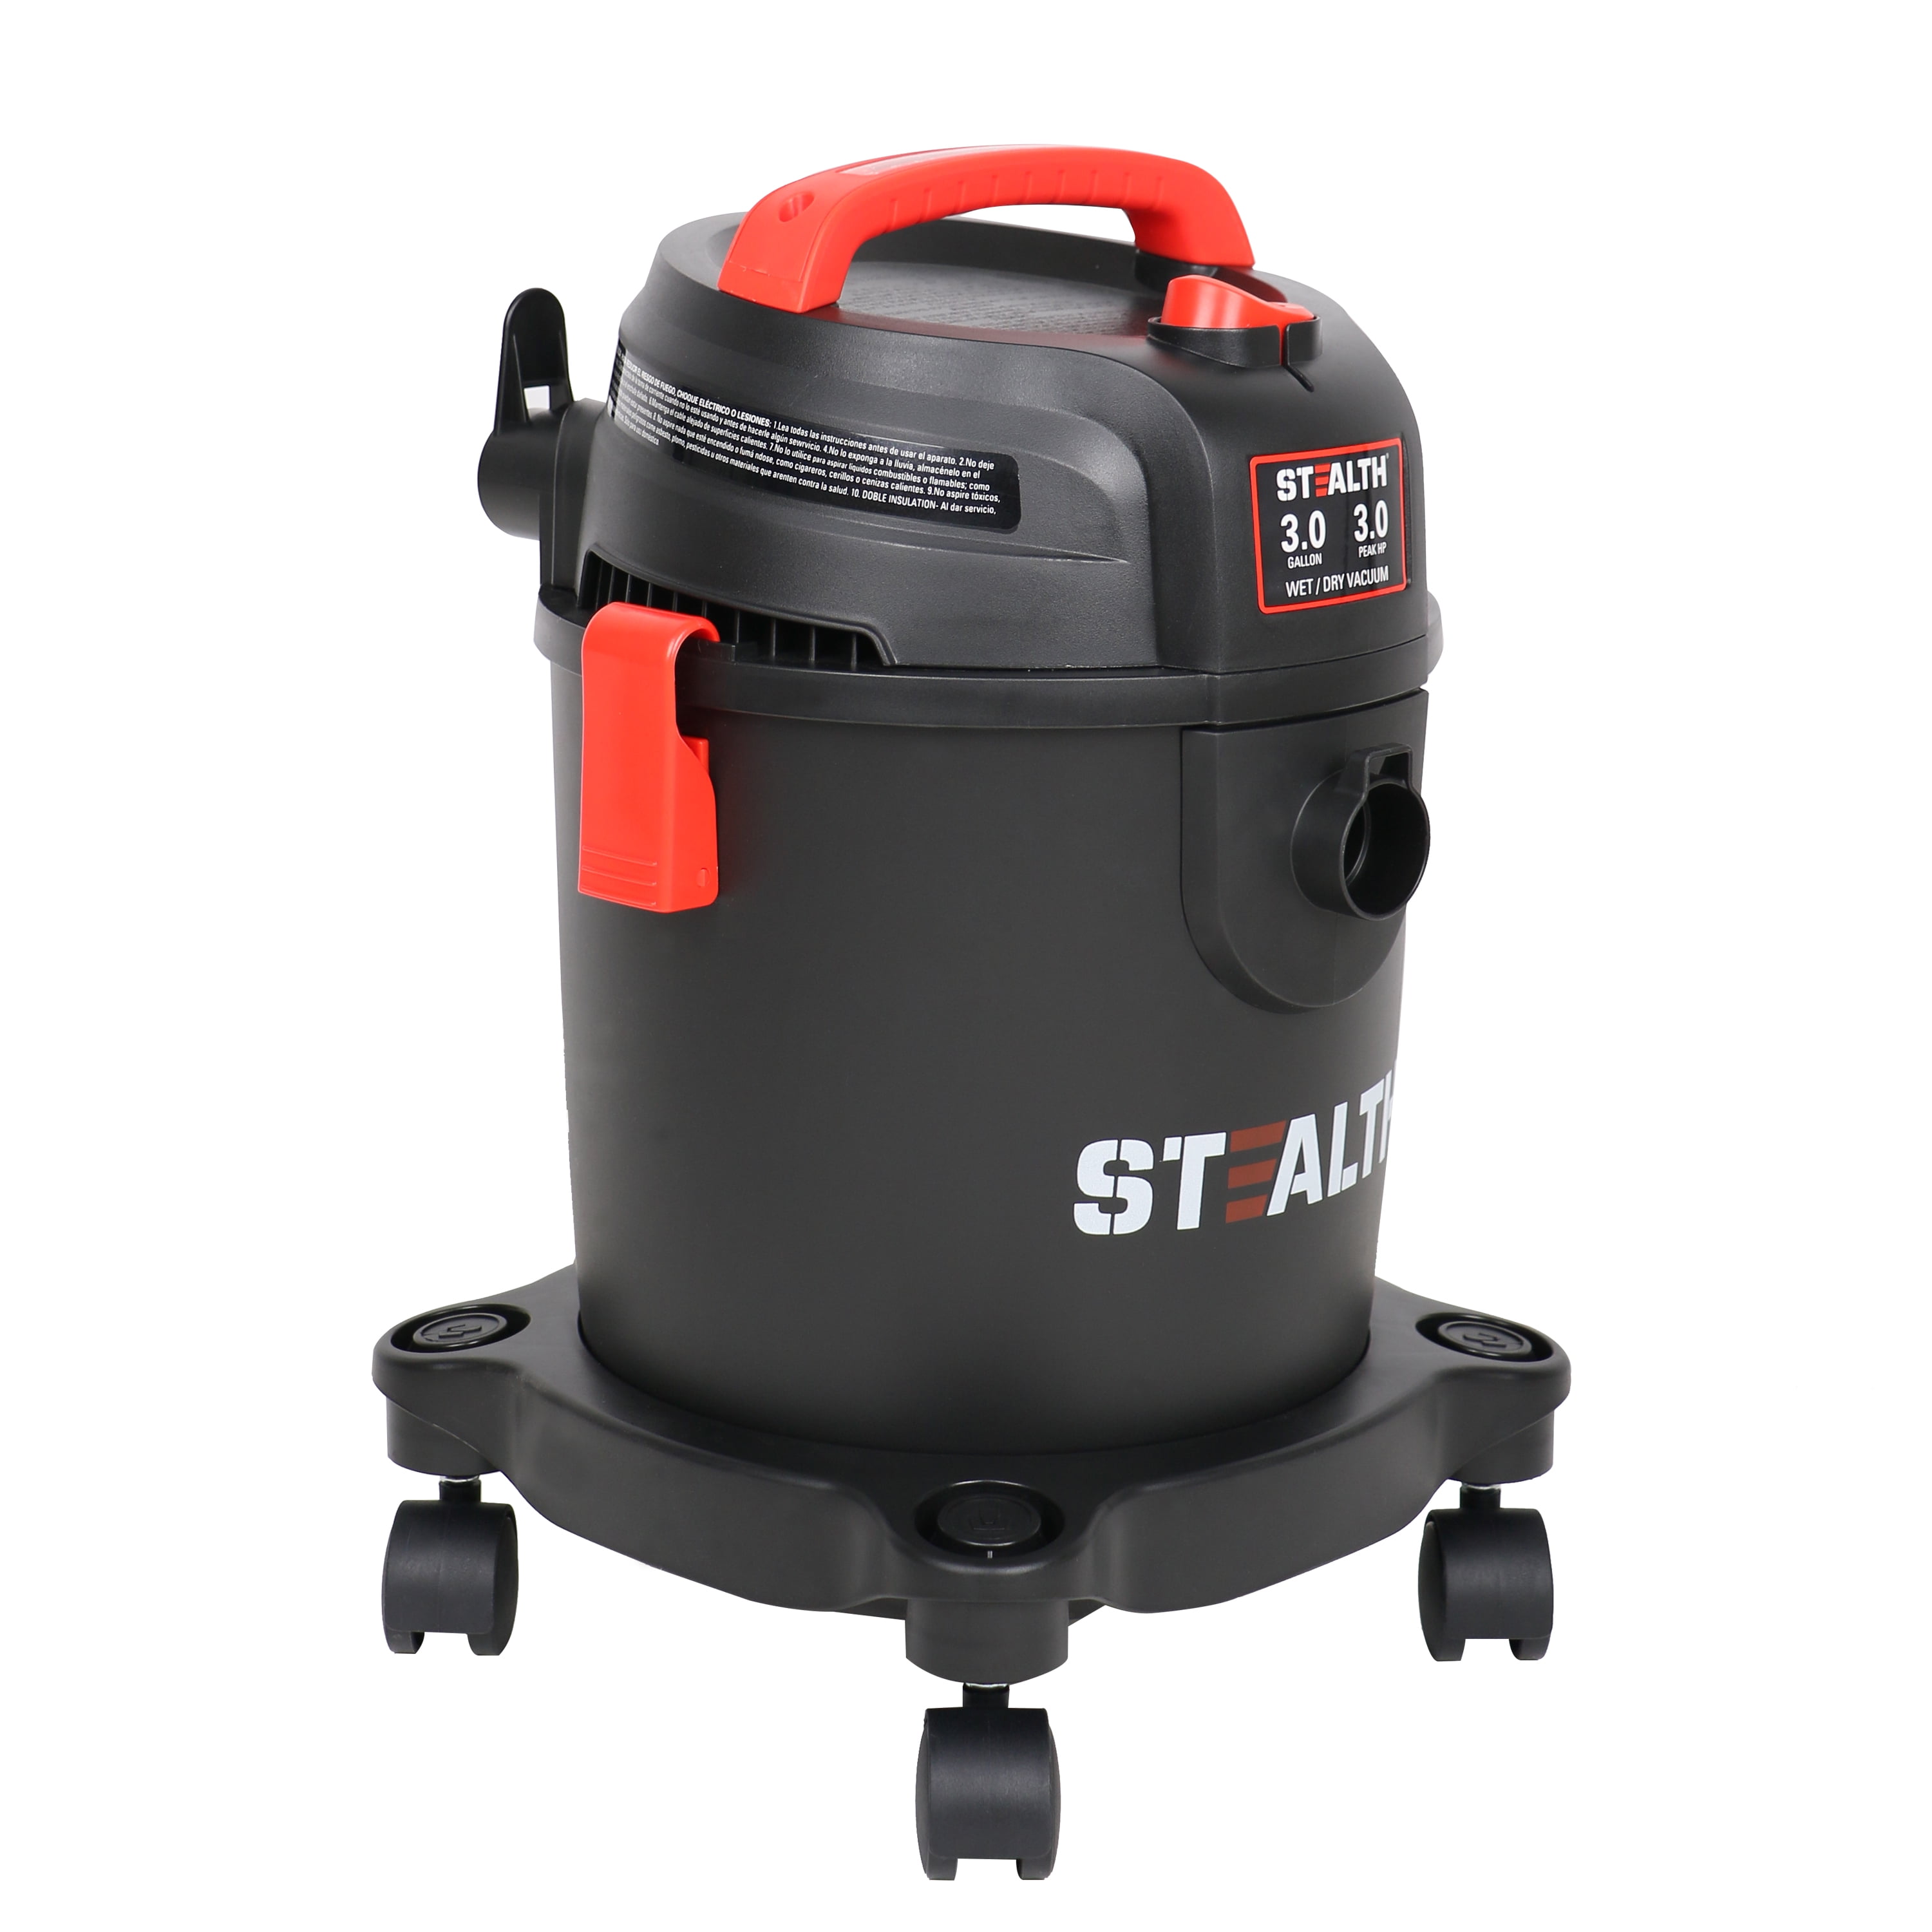 STEALTH 3 Gallon 3 Peak Horsepower Wet Dry Vacuum (AT18202P-3B) with Swiveling Casters